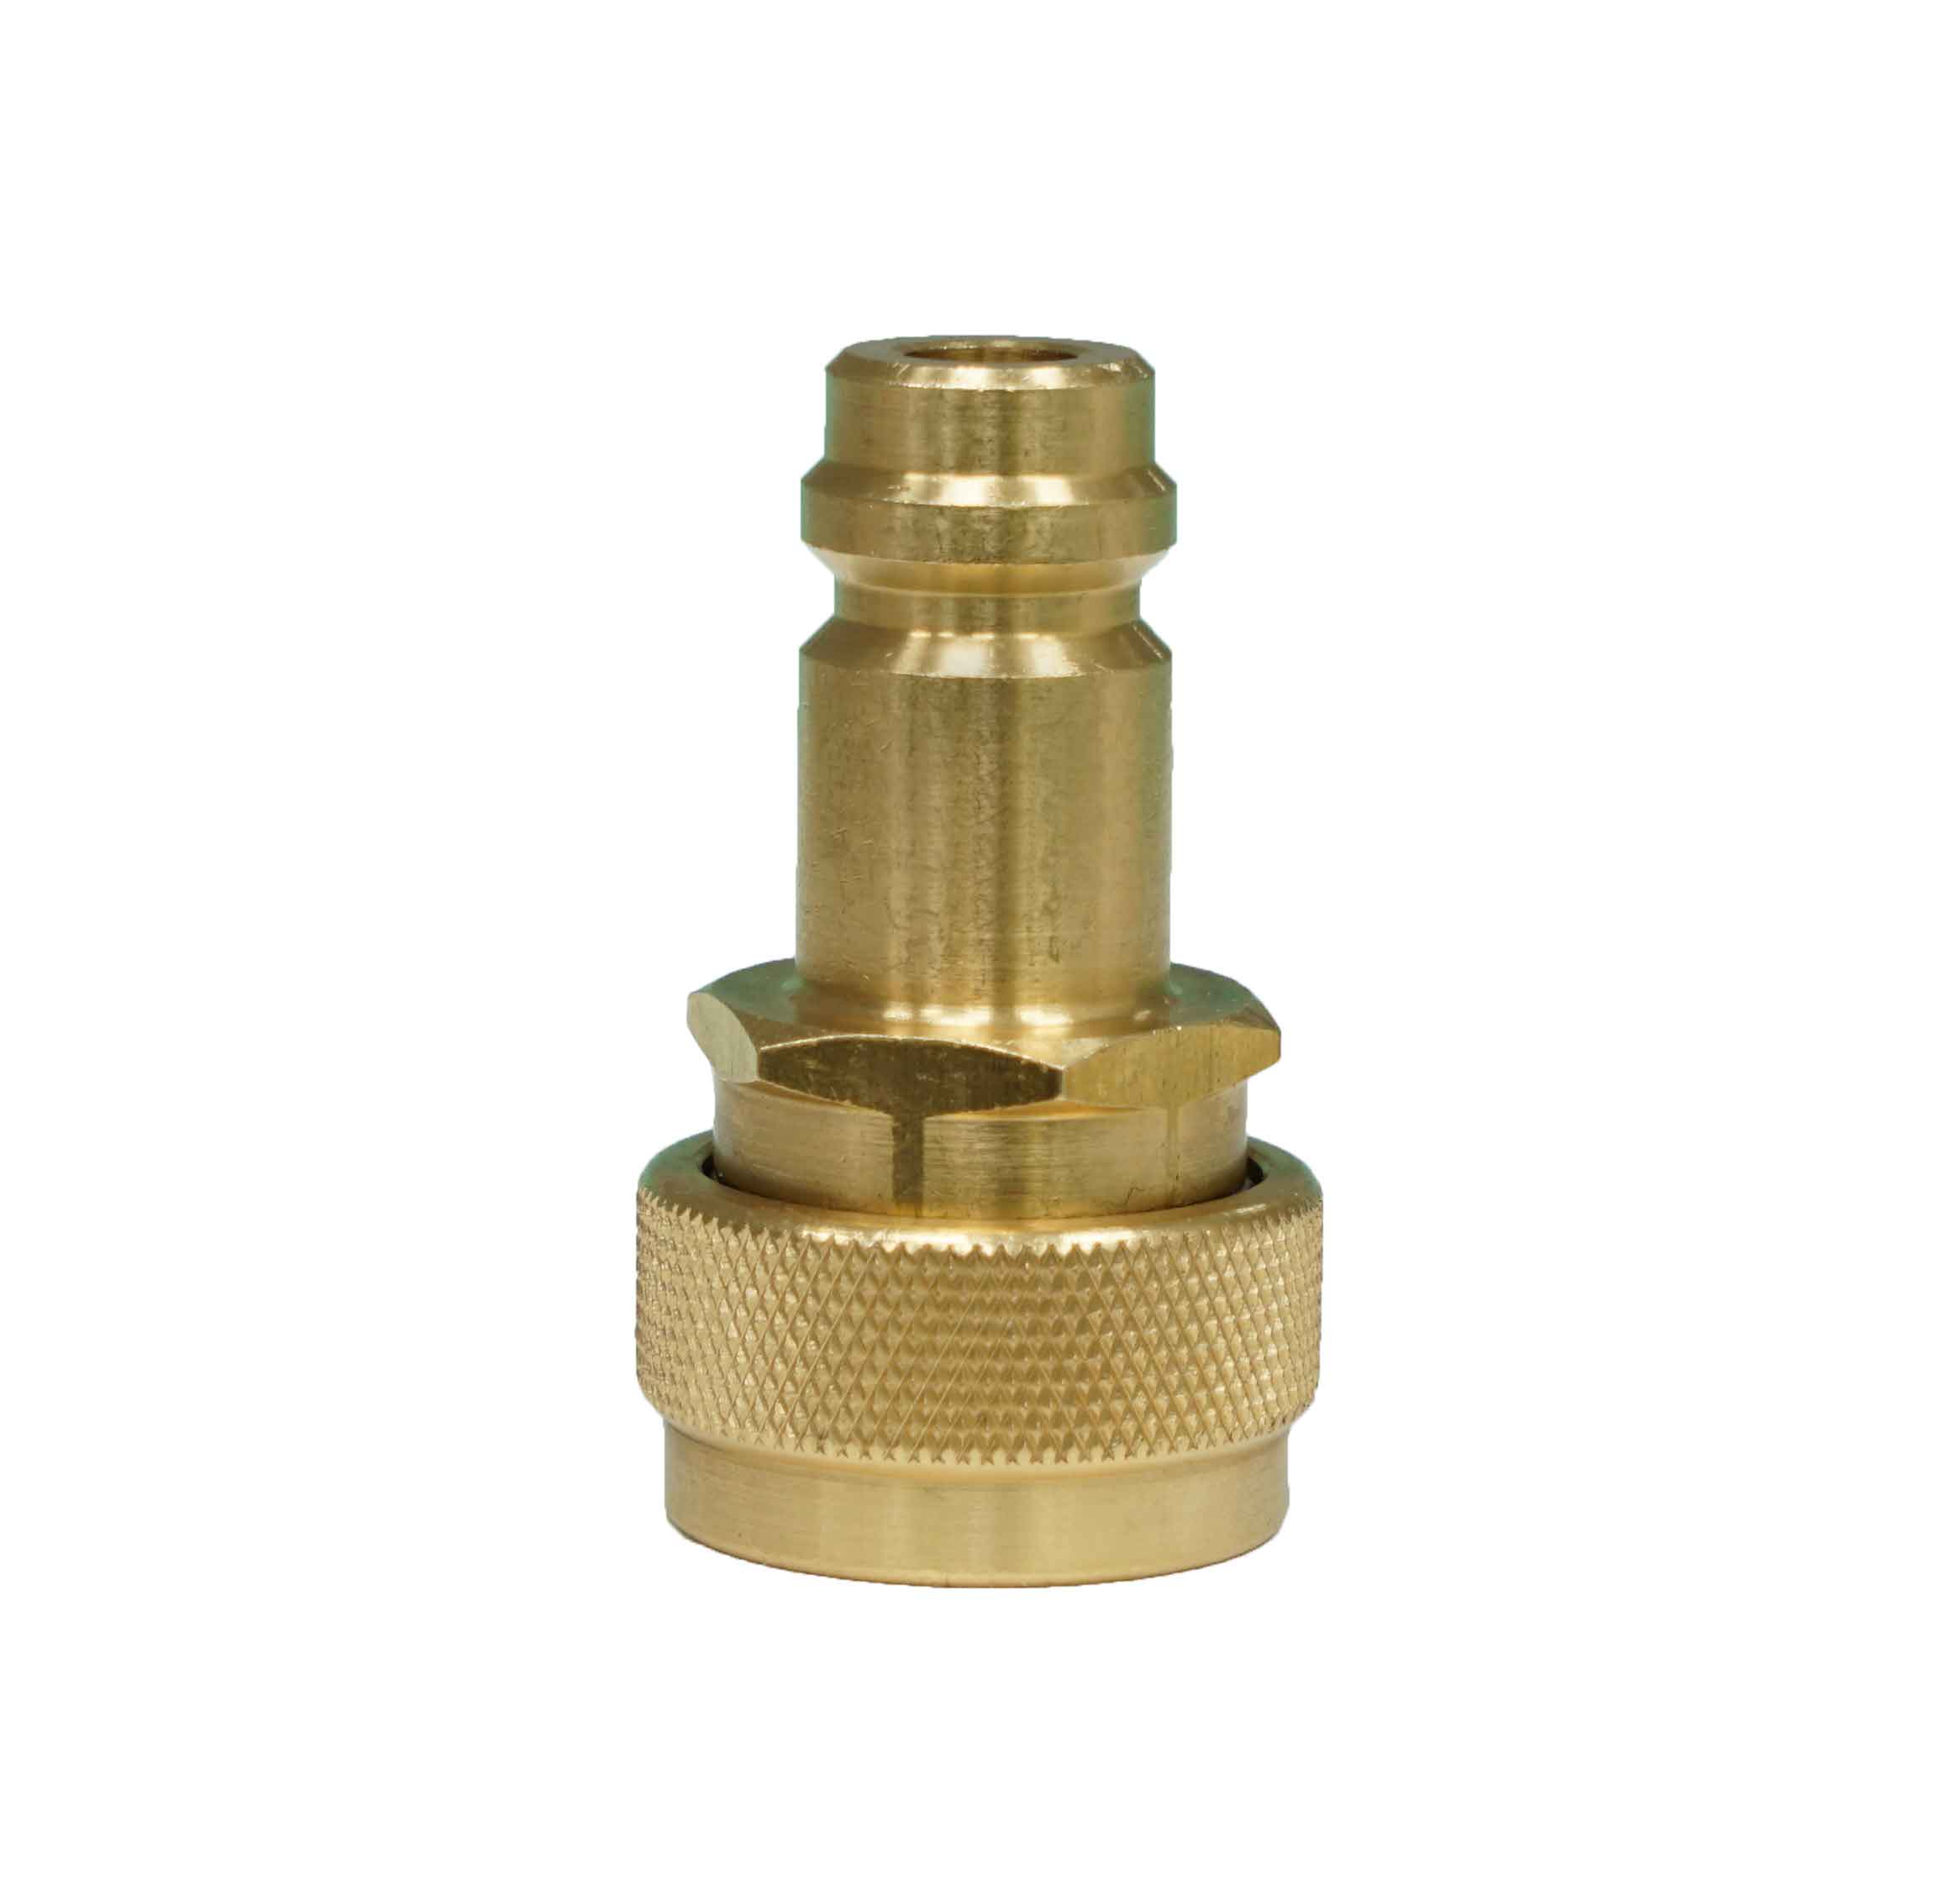 50552-H - Brass-R1234yf-female-coupler-to-R134a-male-coupler-w-STD-valve-core-high-side